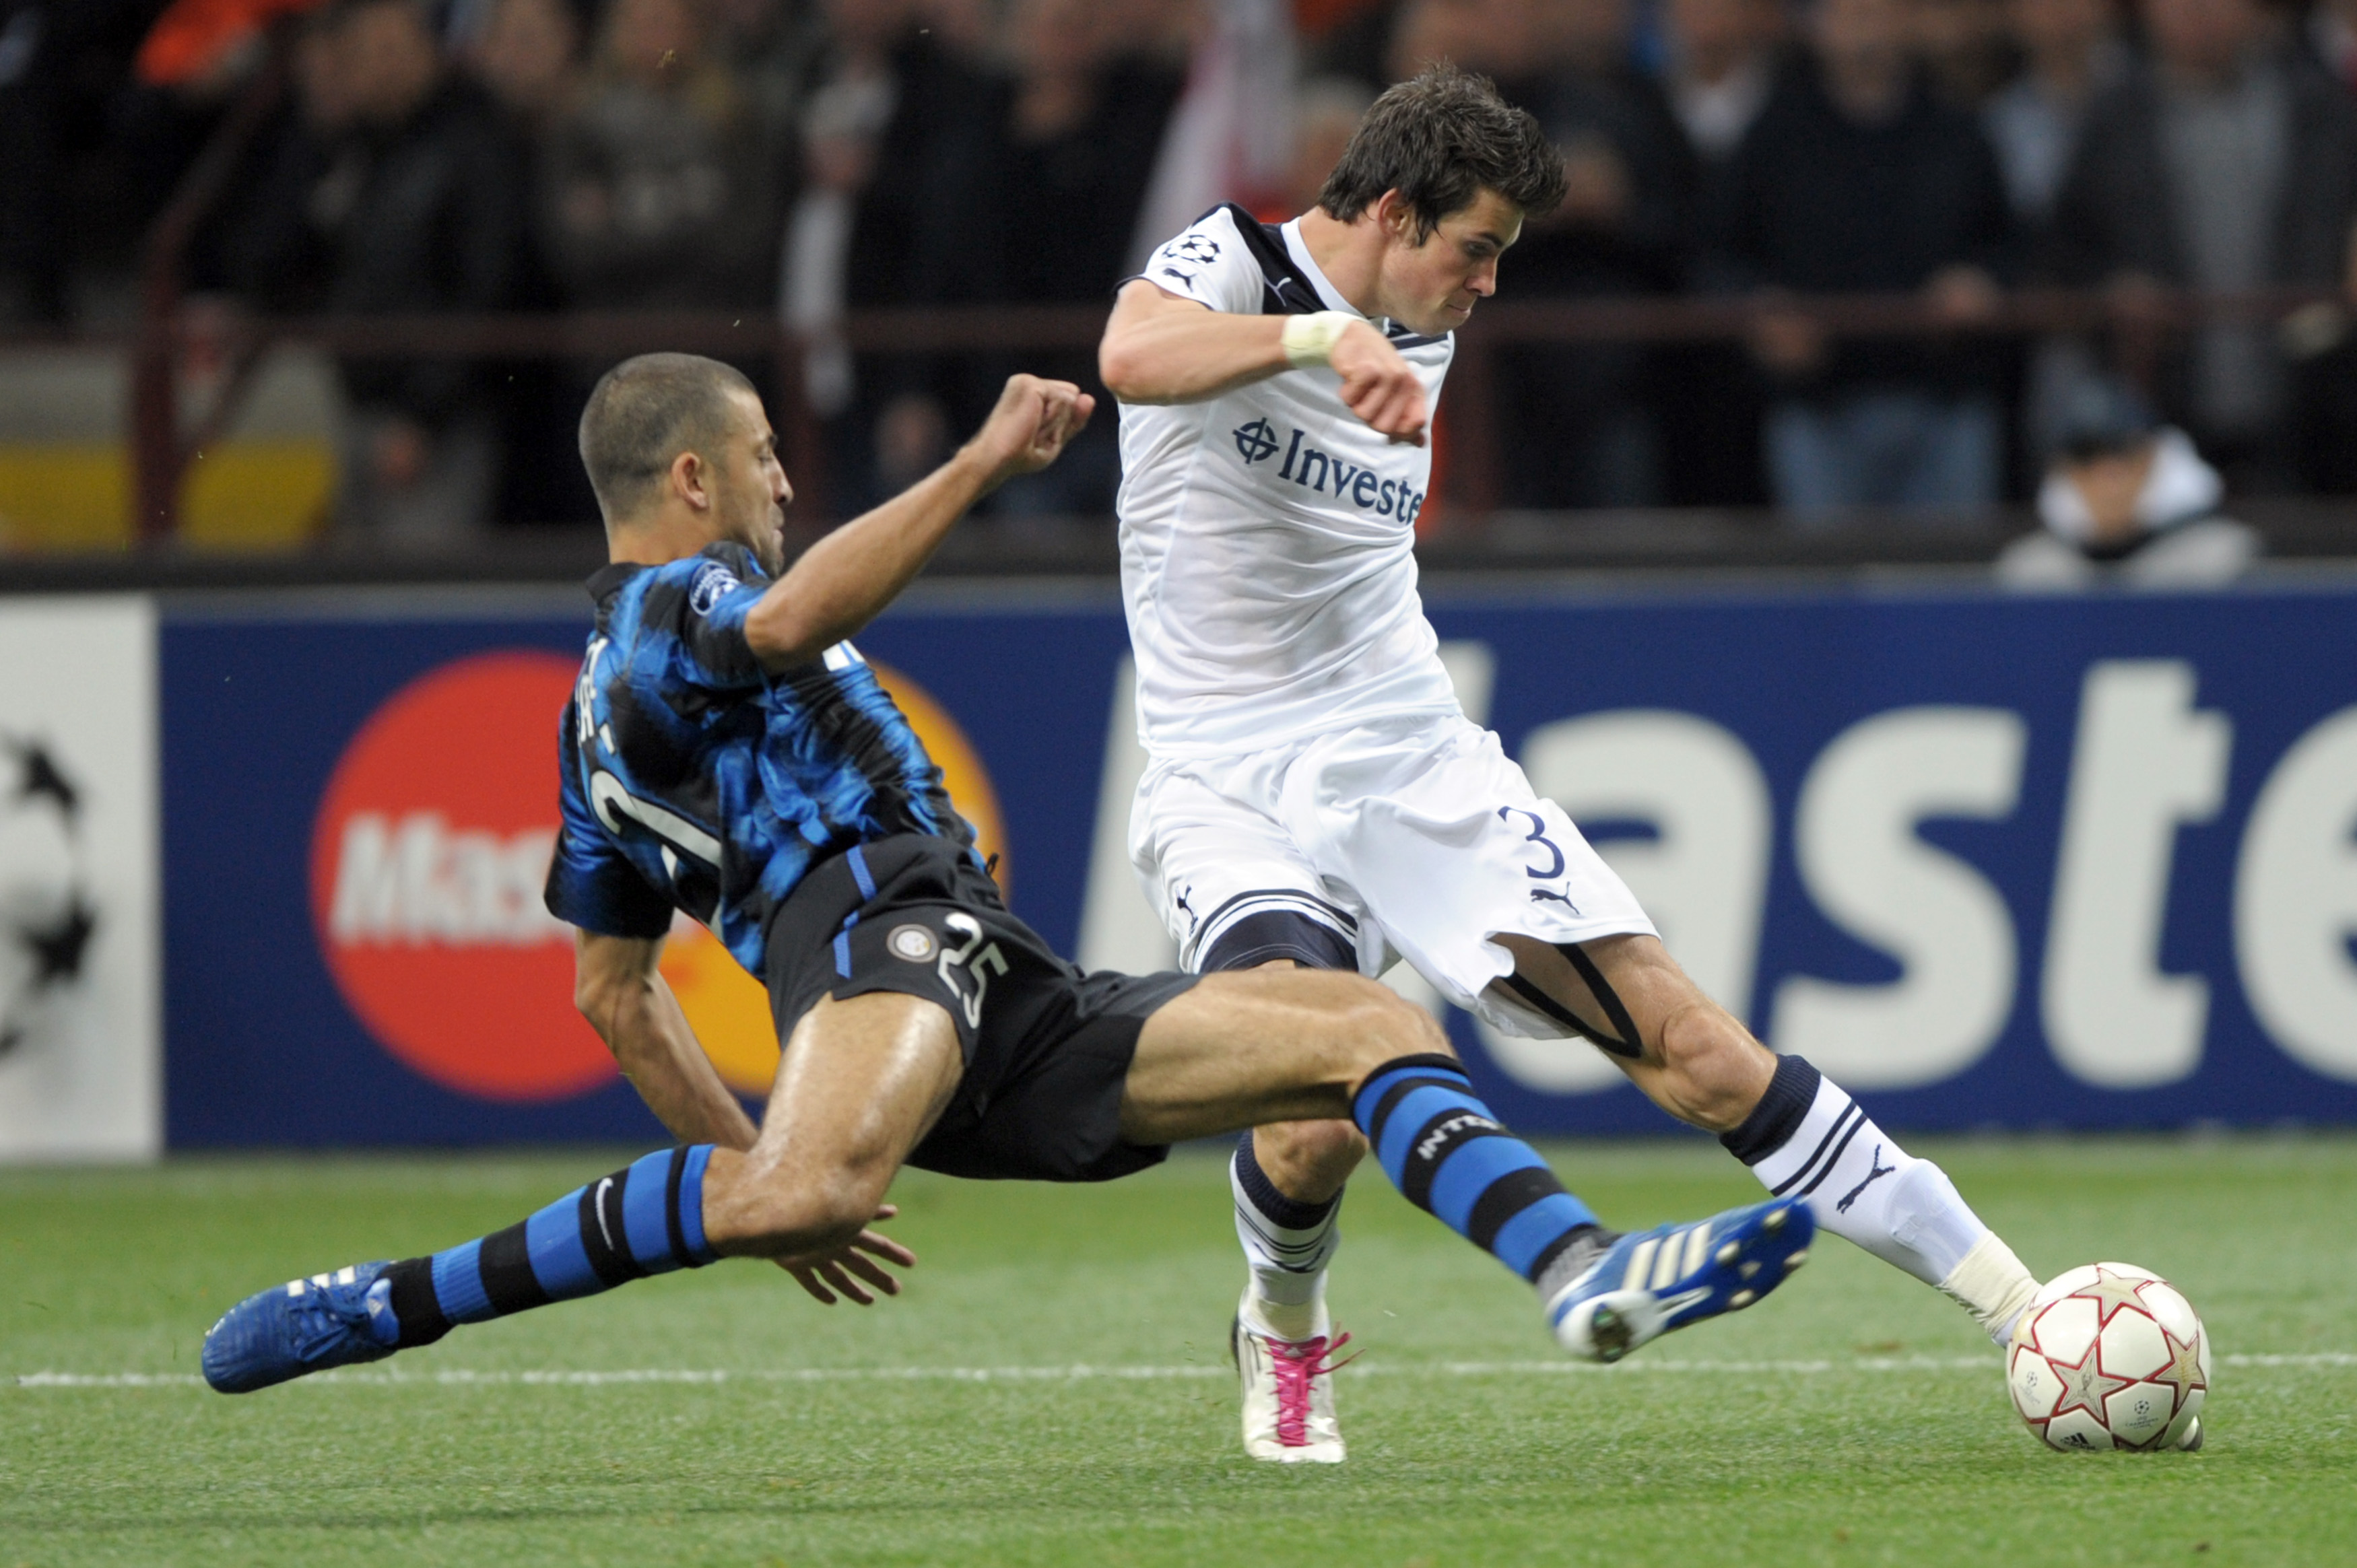 Gareth Bale scores against Inter in the Champions League in 2010.